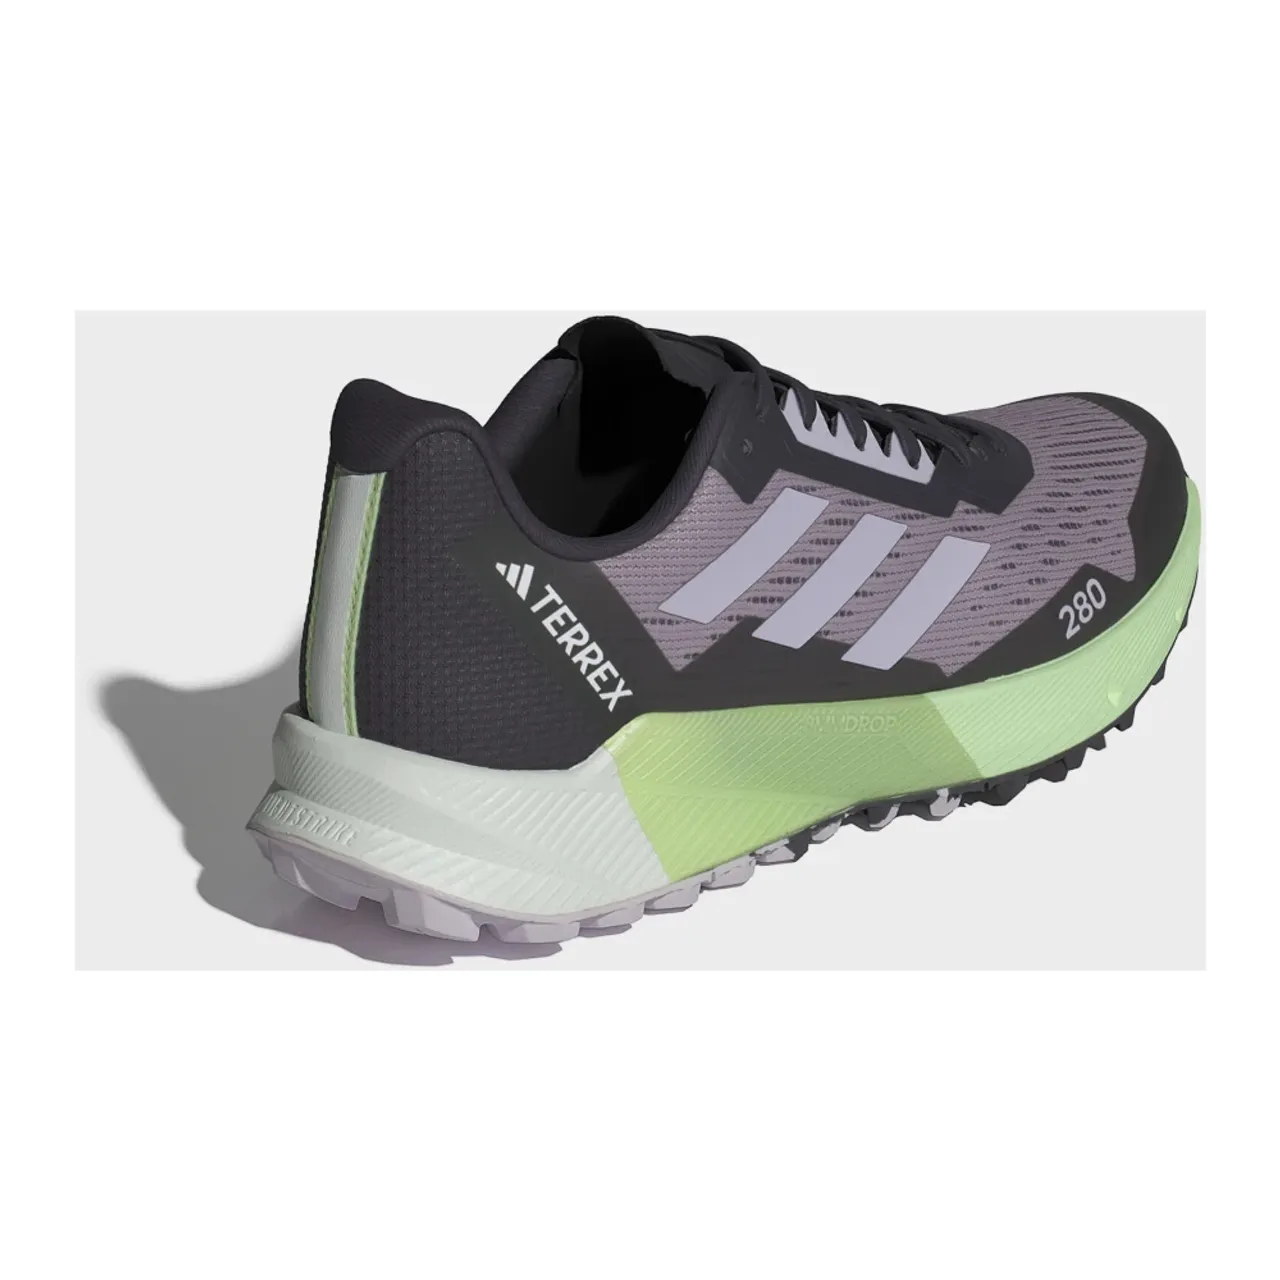 Adidas , Agravic Flow 2 Terrex Trail Running Shoes ,Purple female, Sizes: